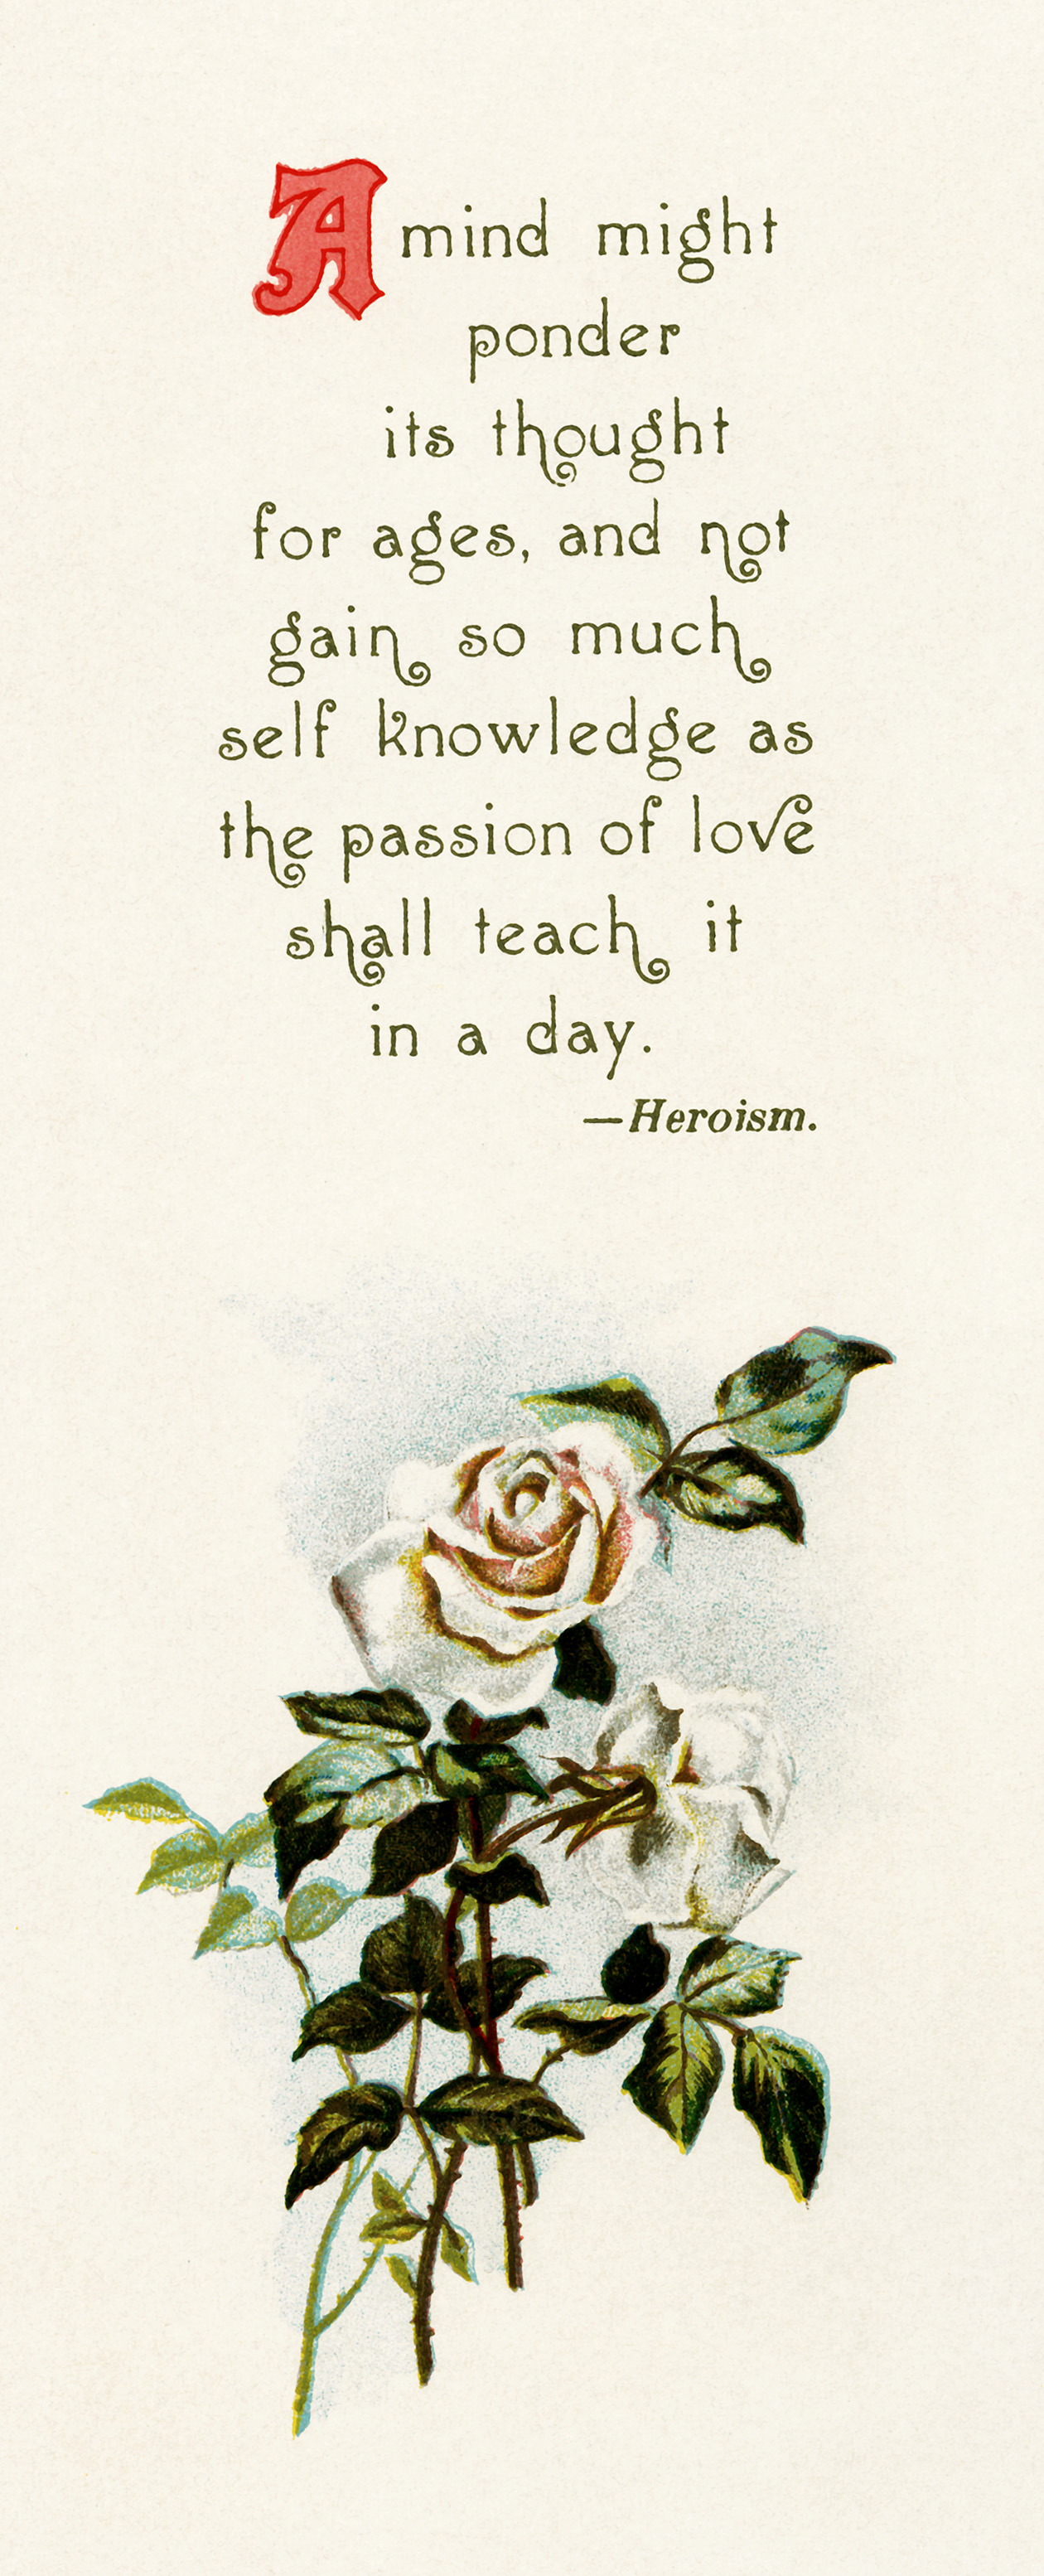 Here is a short love poem accompanied by a beautiful illustration of a ...